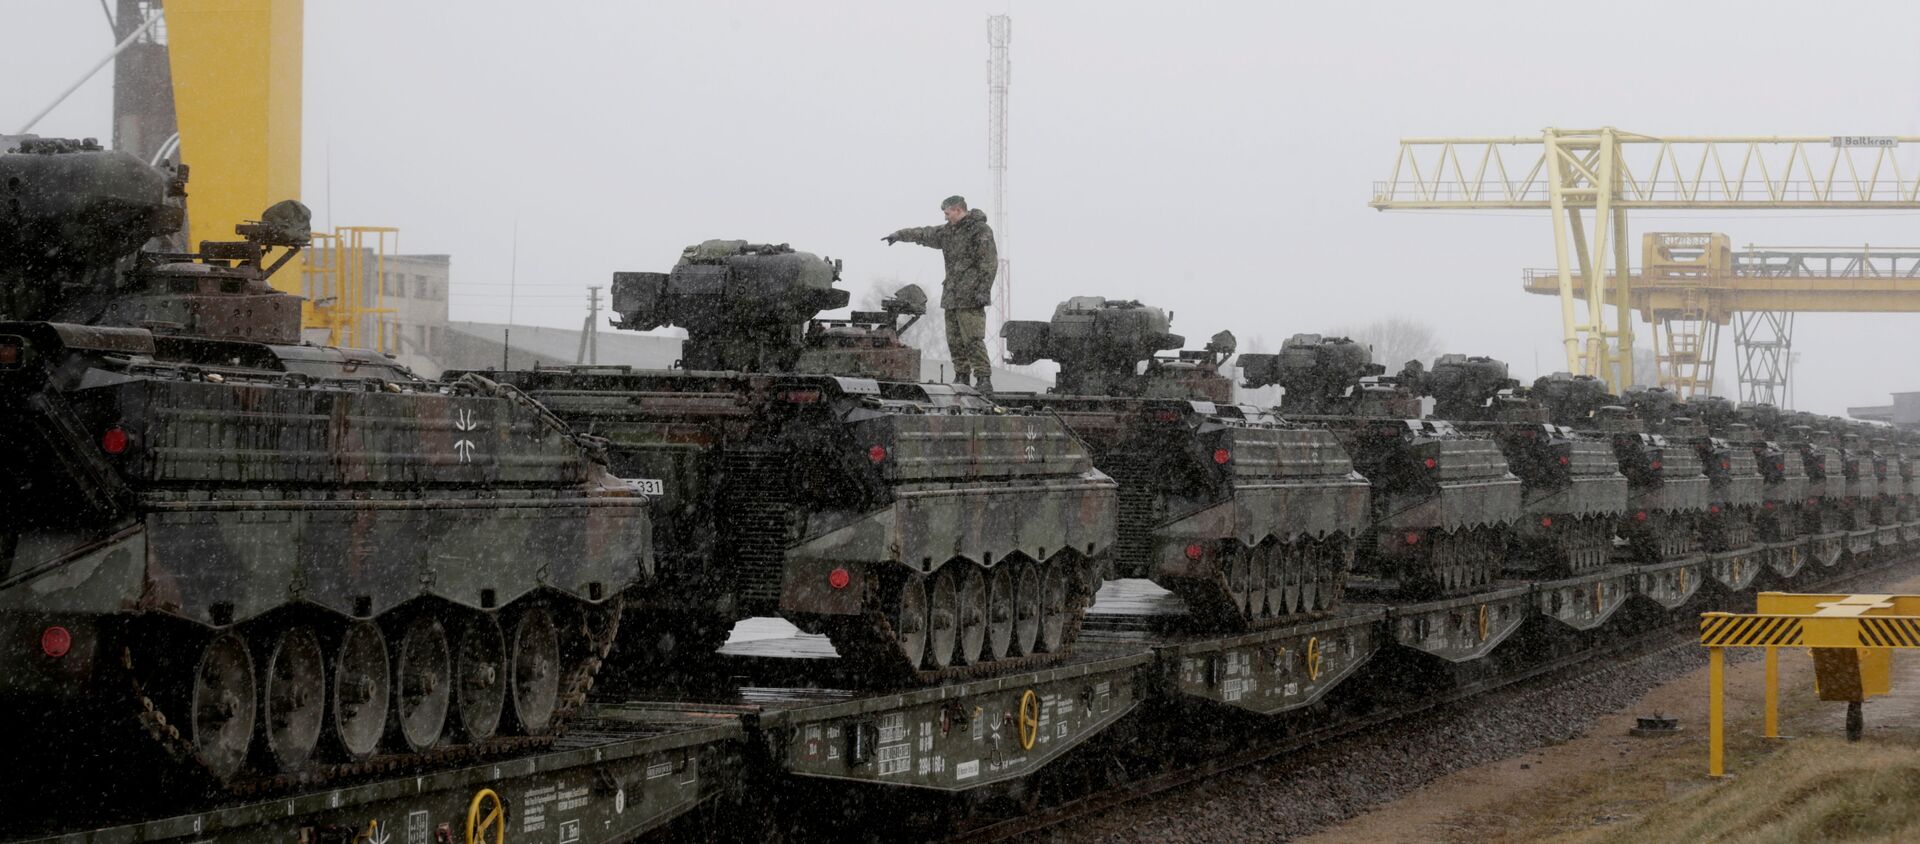 A German army soldier prepares to unload Marder infantry fighting vehicles at the railway station in Sestokai, Lithuania, February 24, 2017 - Sputnik International, 1920, 18.05.2021